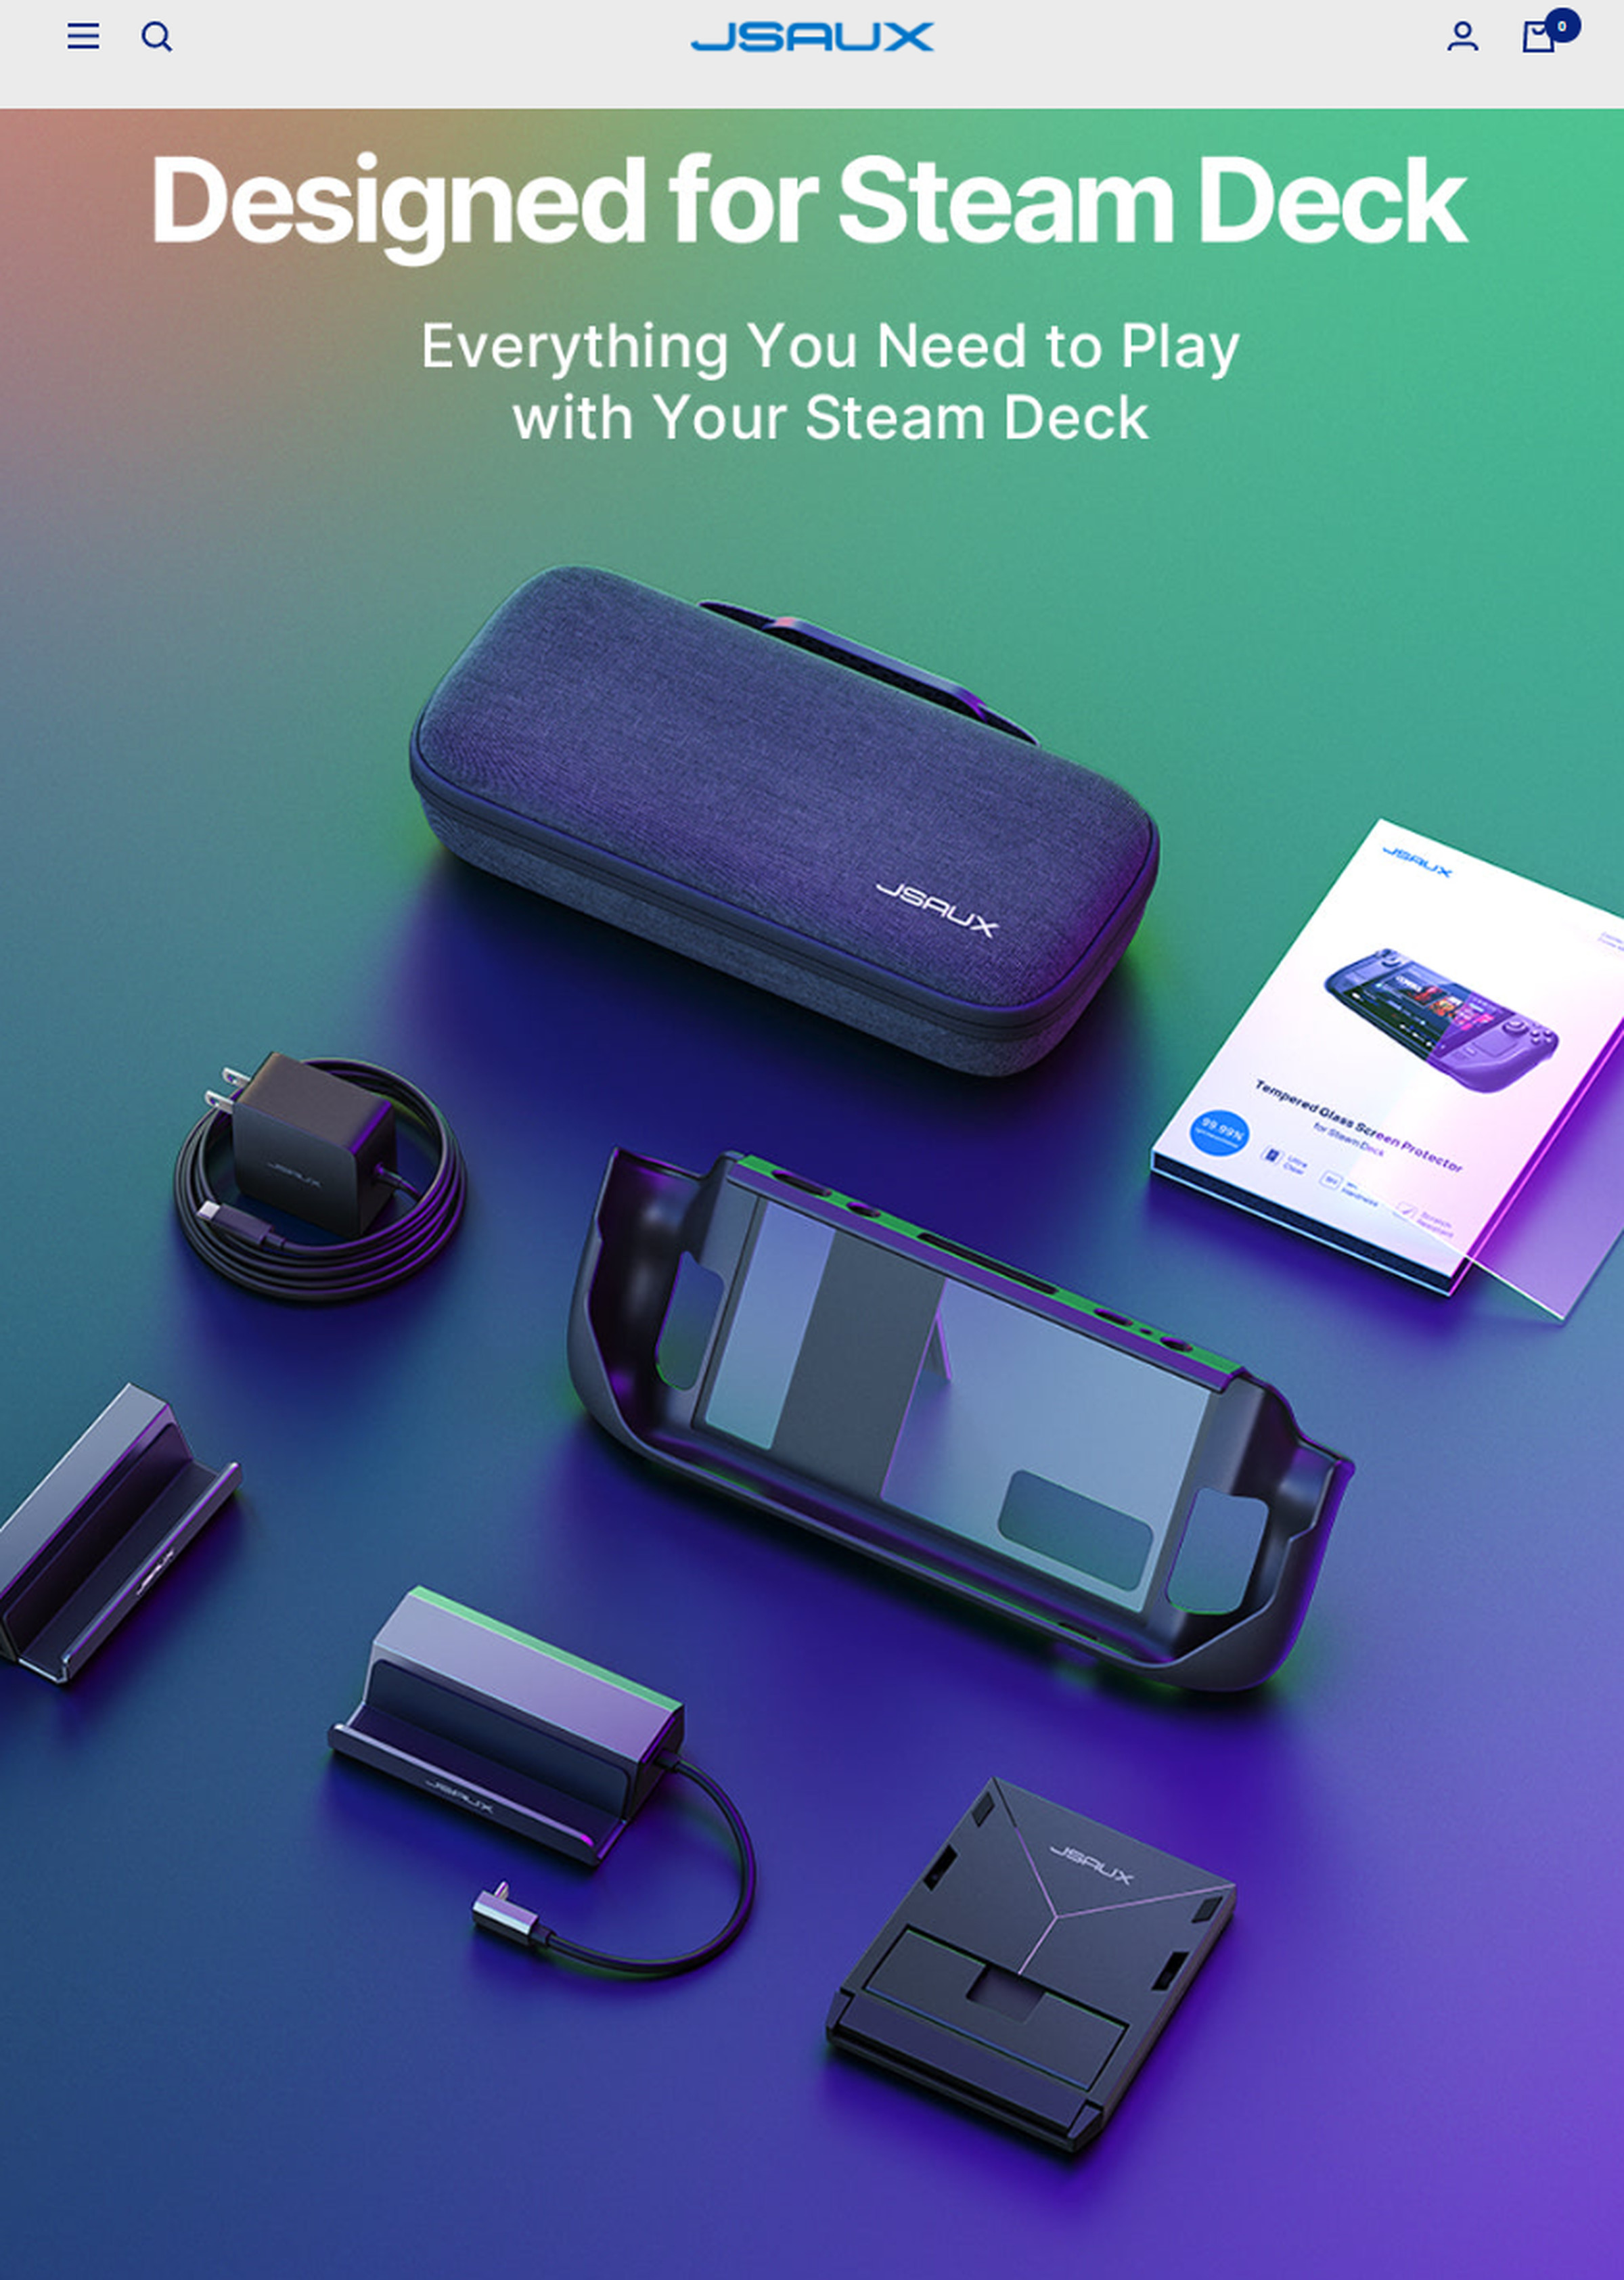 Once Jsaux began its big push on Steam Deck accessories, its homepage became all about Valve’s handheld.